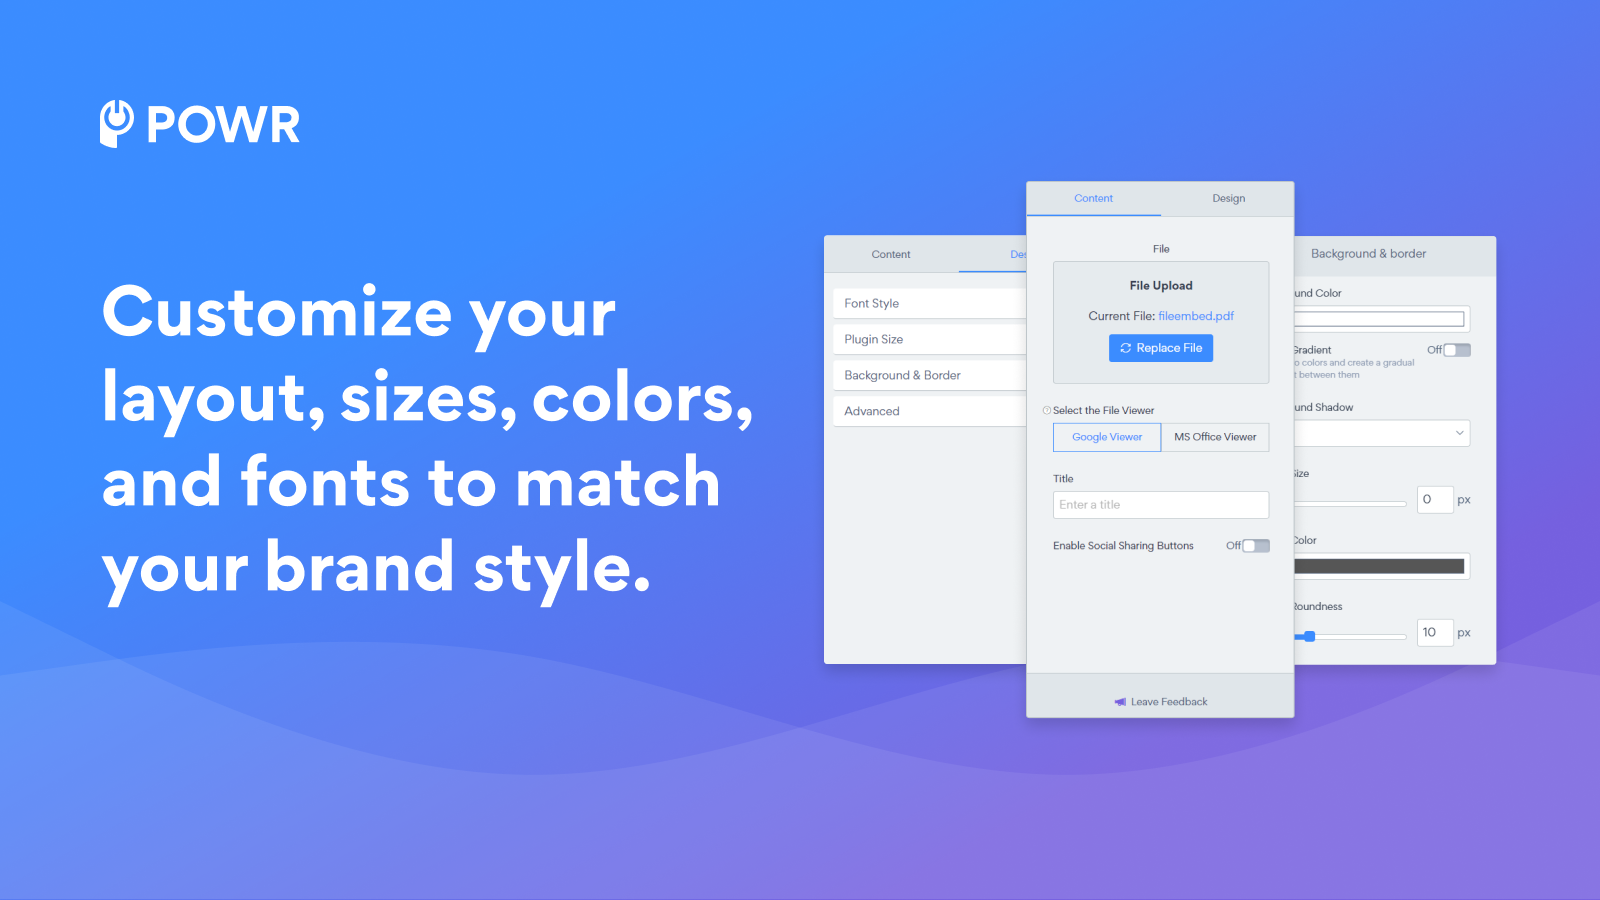 Customize your layout, sizes, colors, fonts to match your brand